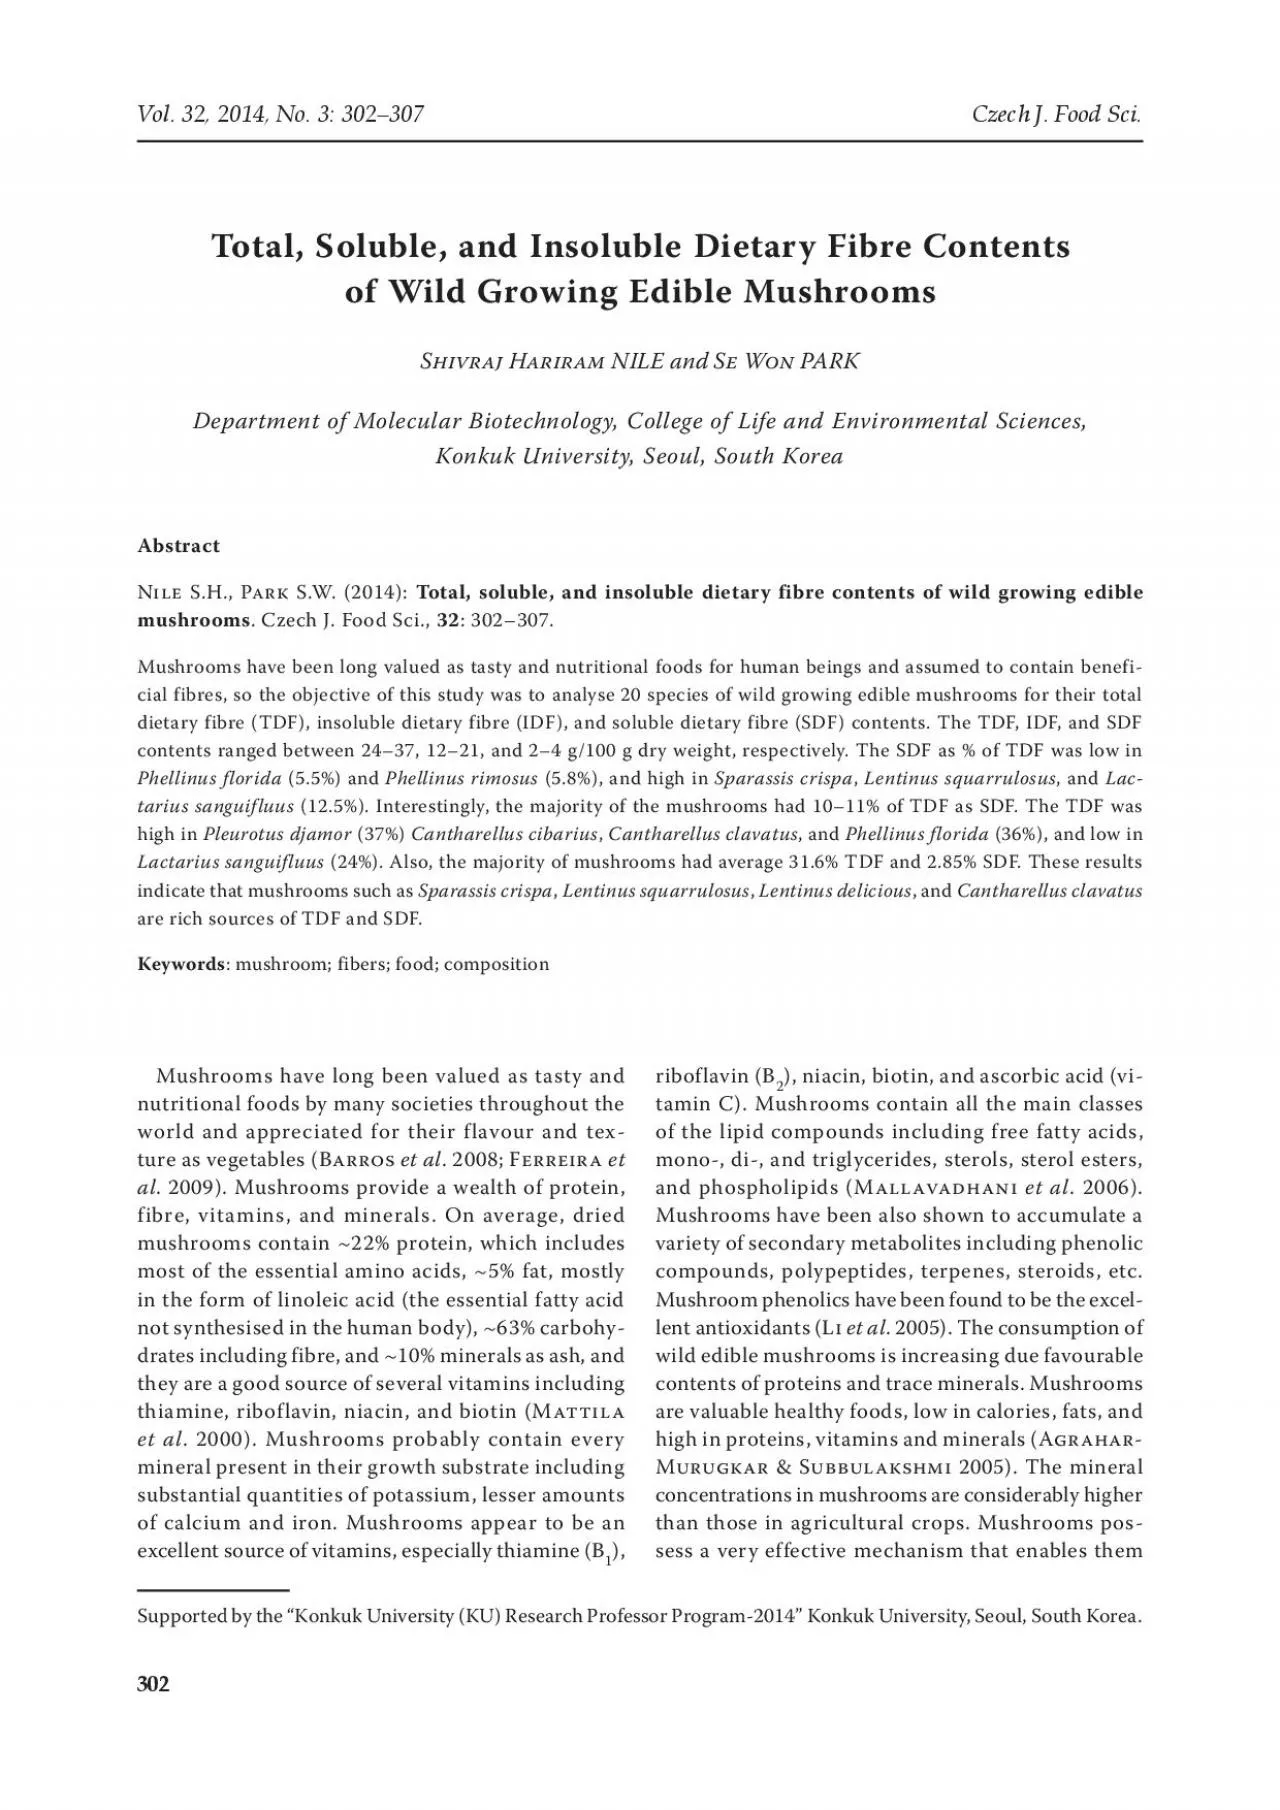 Total Soluble and Insoluble Dietary Fibre Contents of Wild Growing E